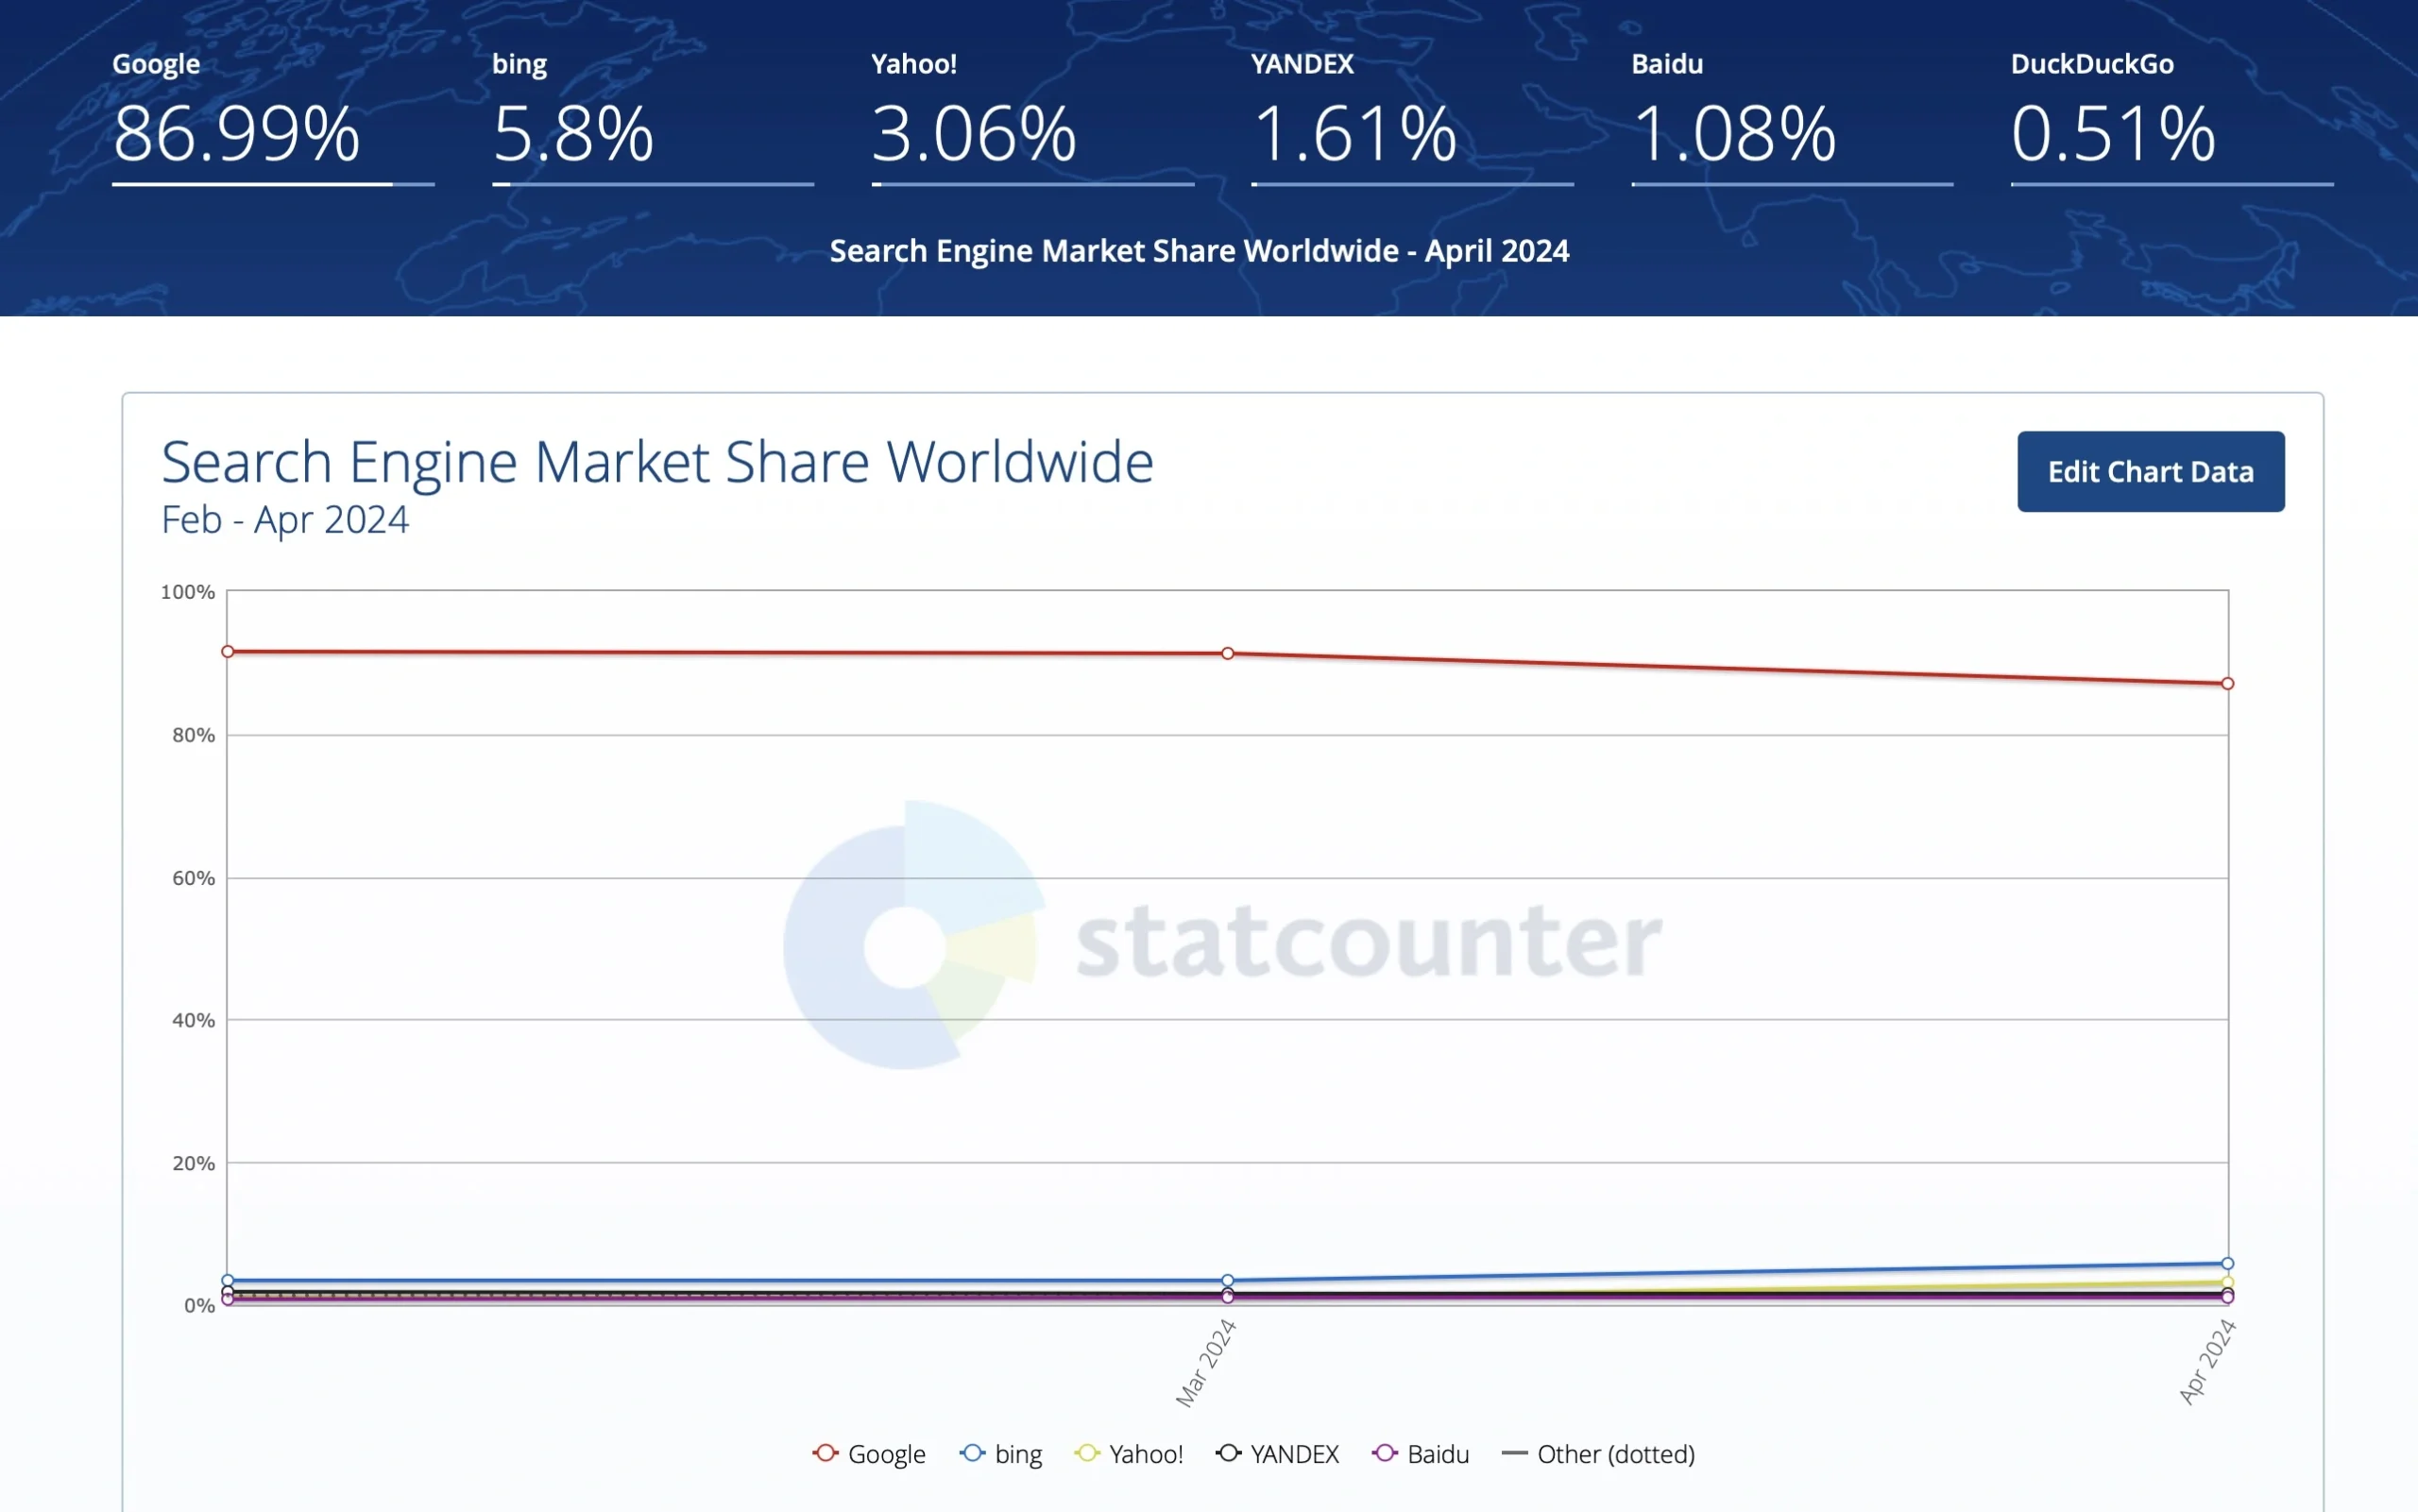 Search Engine Market Share Worldwide scaled